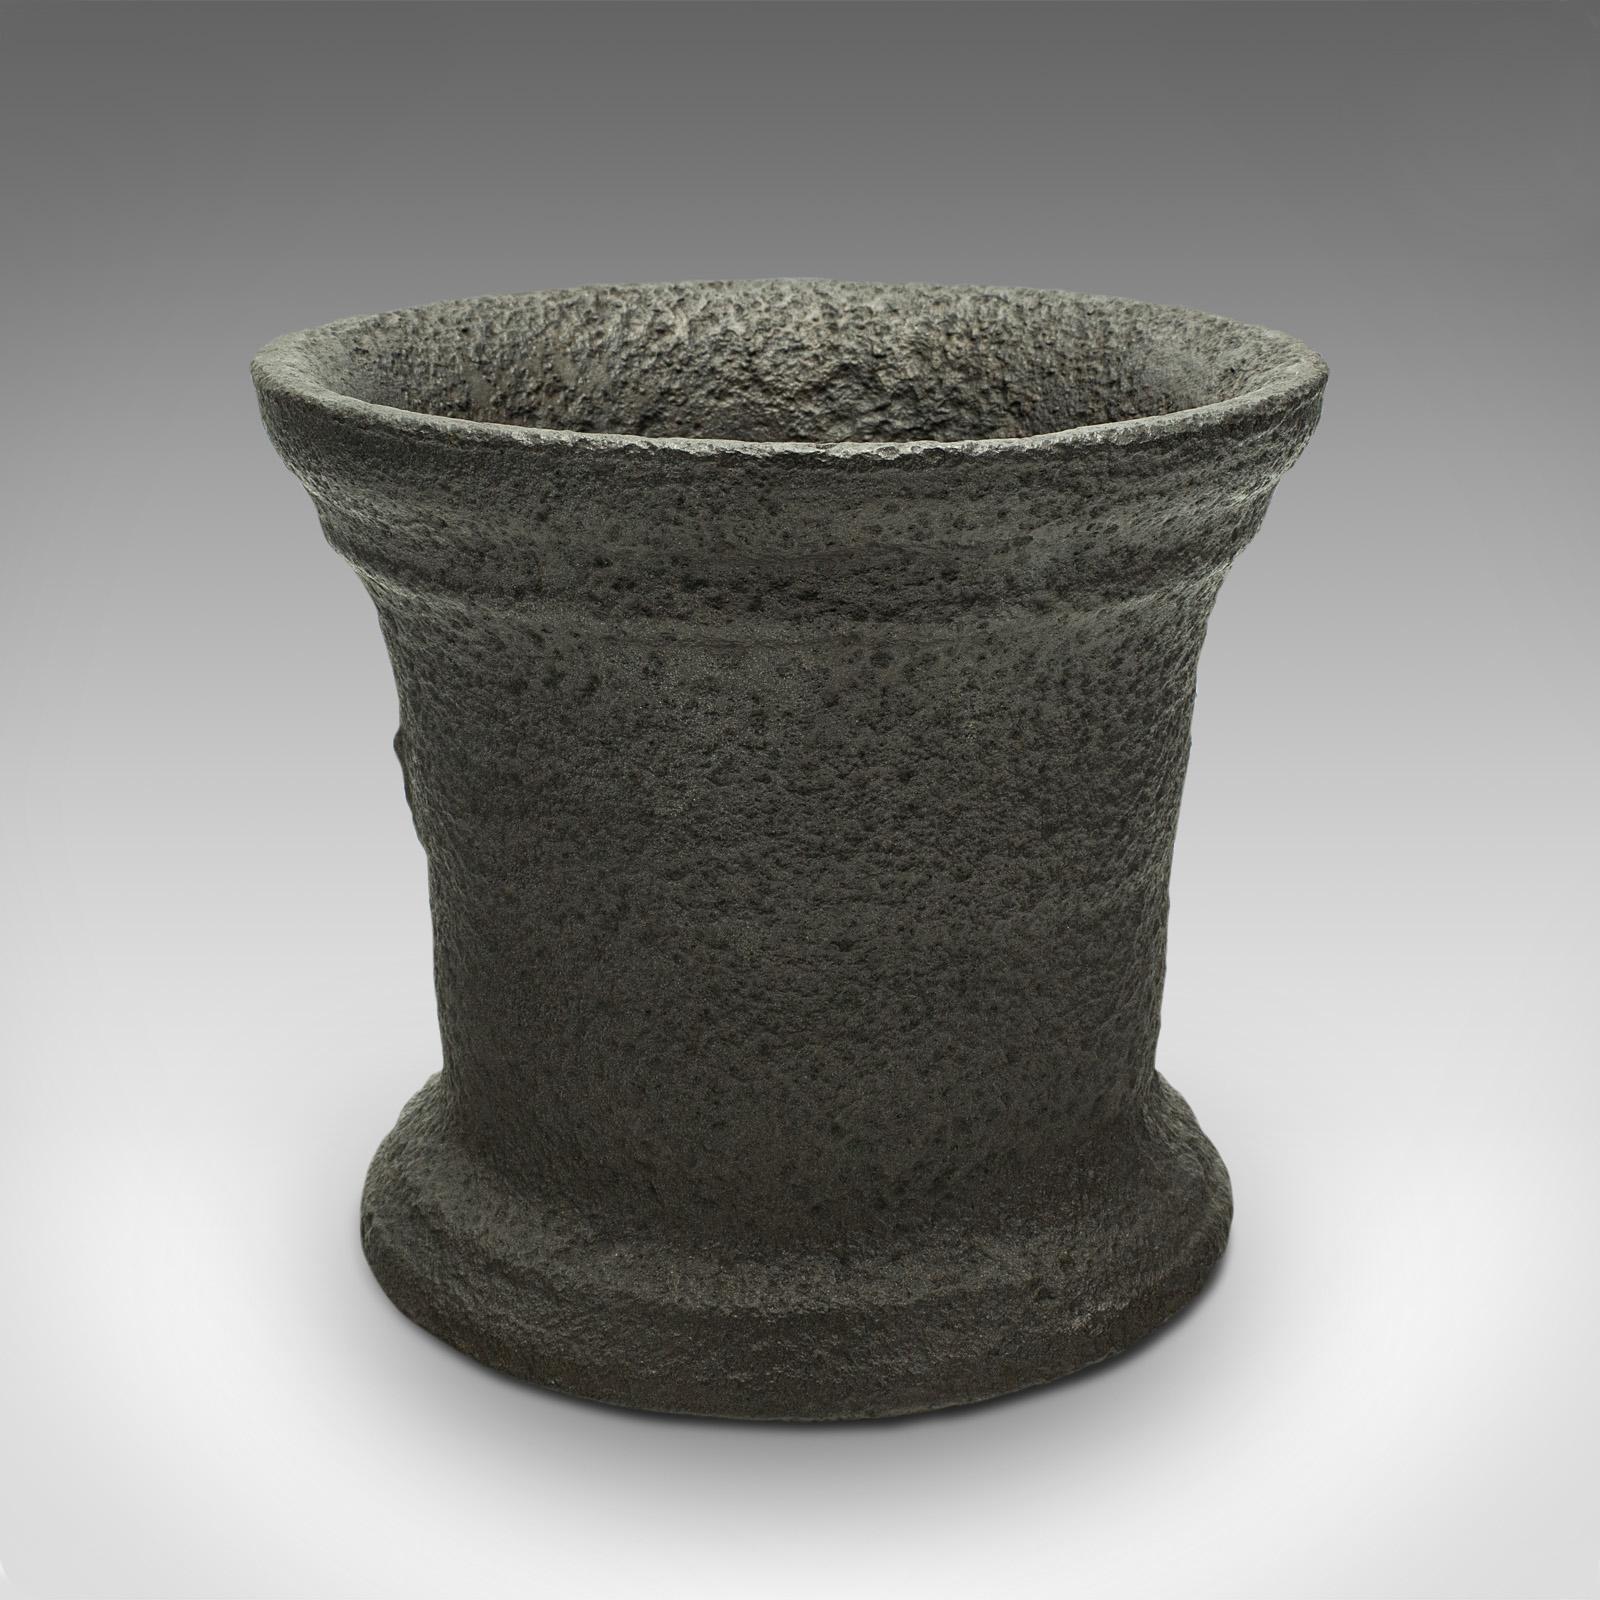 This is a heavy antique chemist's mortar. An English, cast iron decorative planter pot, dating to the mid Georgian period, circa 1750.

Fascinatingly weathered Georgian mortar
Displaying a desirable aged patina throughout
Substantial cast iron